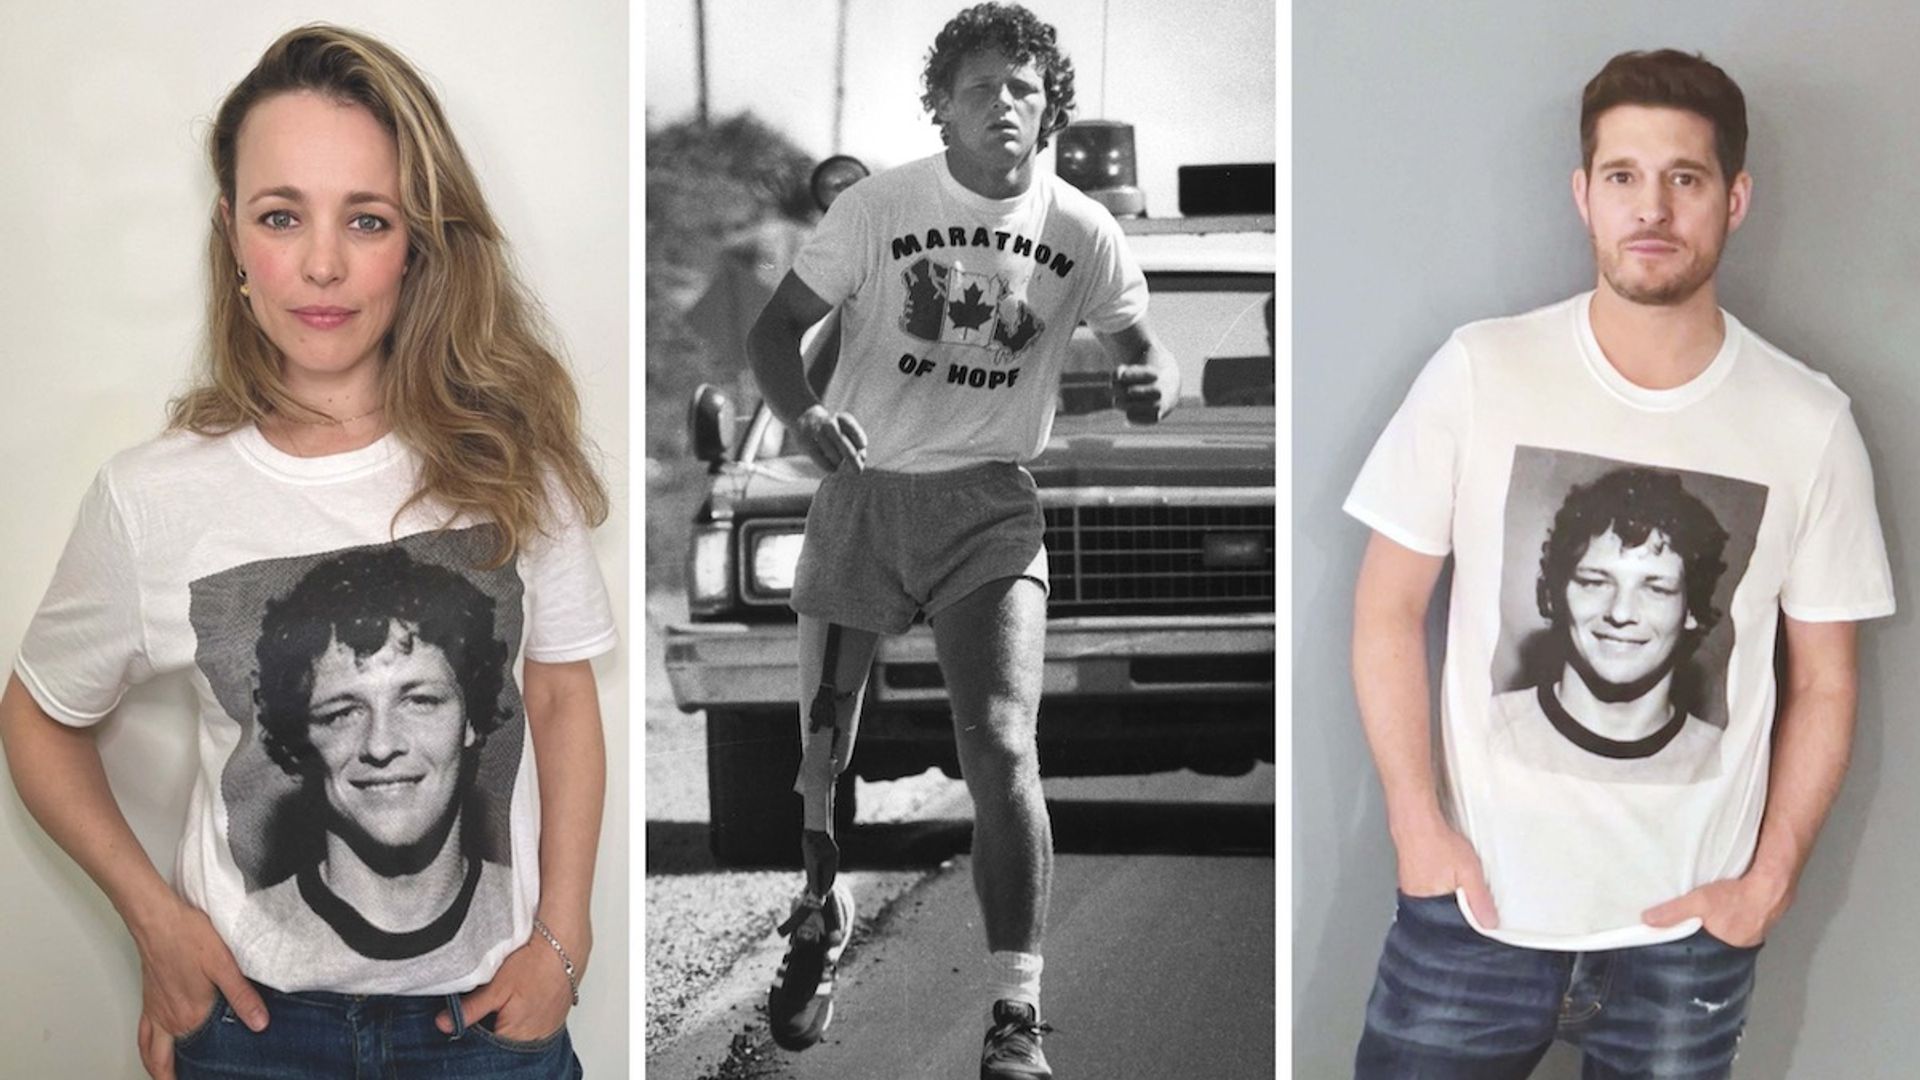 Rachel McAdams and Michael Bublé in the Terry Fox Run campaign T-shirt. Terry himself is pictured centre, running in 1980. 